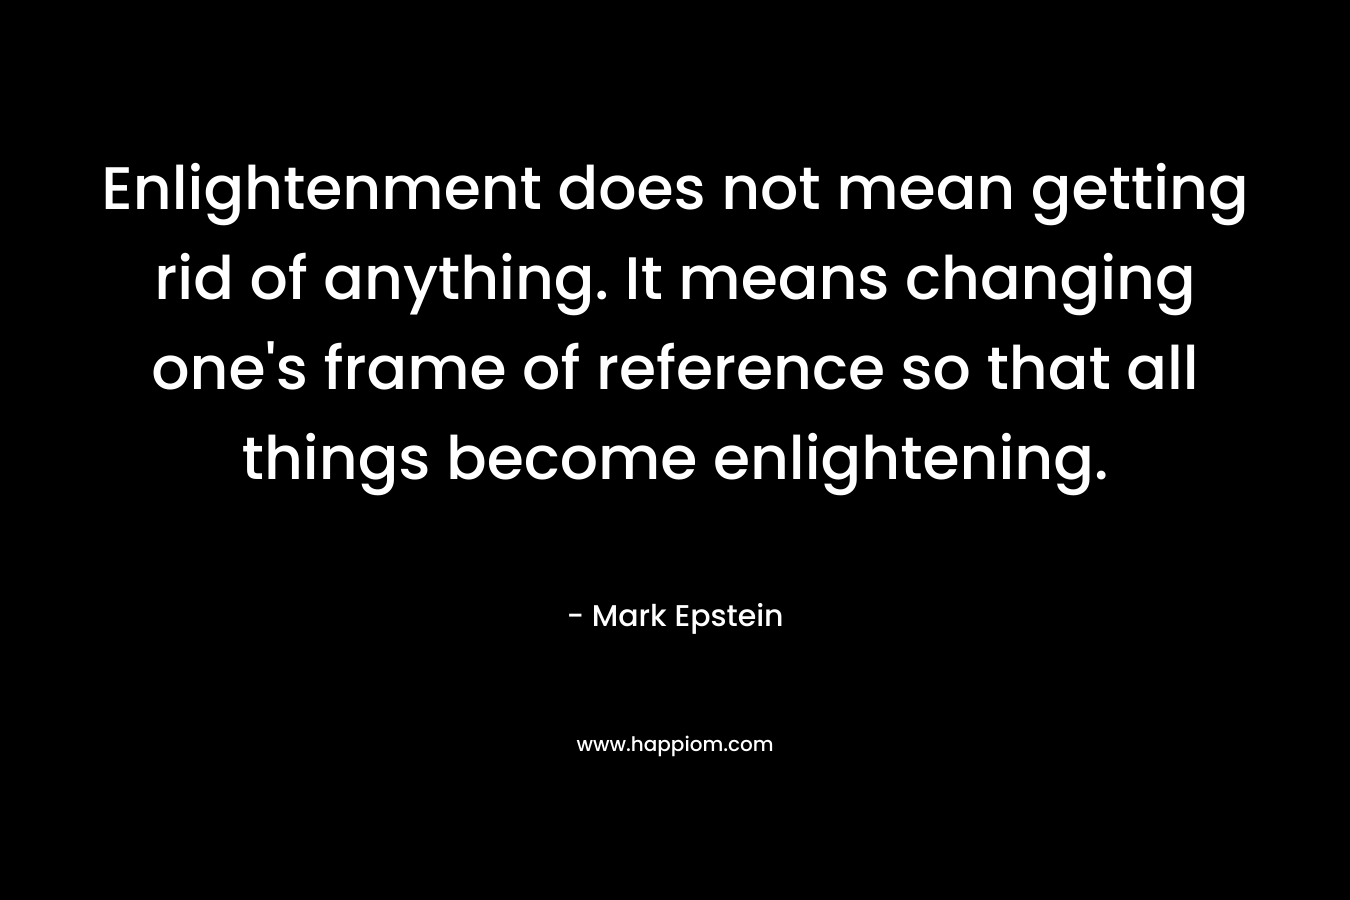 Enlightenment does not mean getting rid of anything. It means changing one’s frame of reference so that all things become enlightening. – Mark Epstein